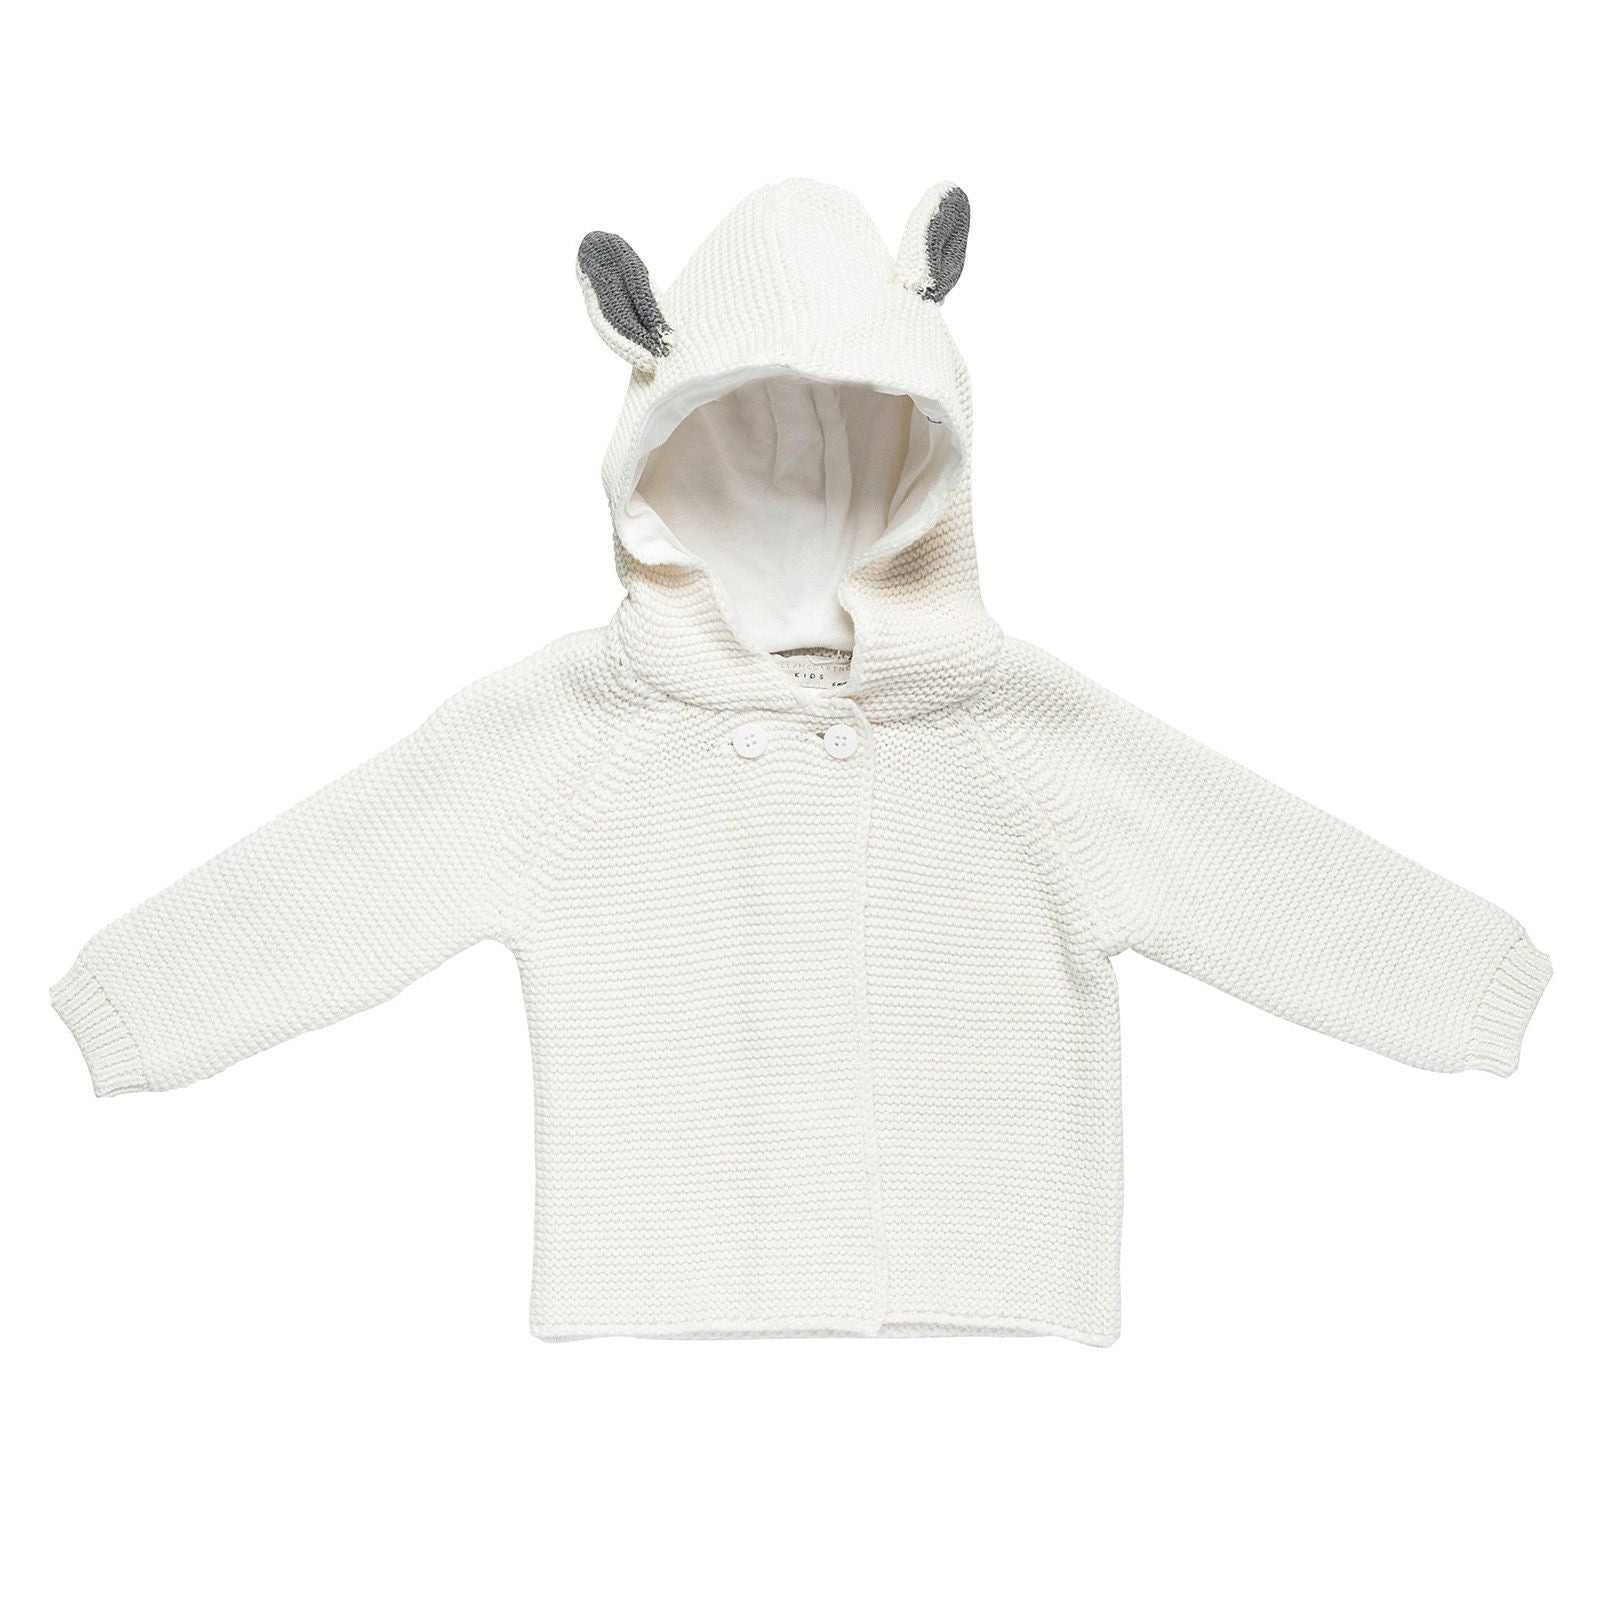 Baby White Cotton Knitted Cardigan With Hood Bunny Ears Trims - CÉMAROSE | Children's Fashion Store